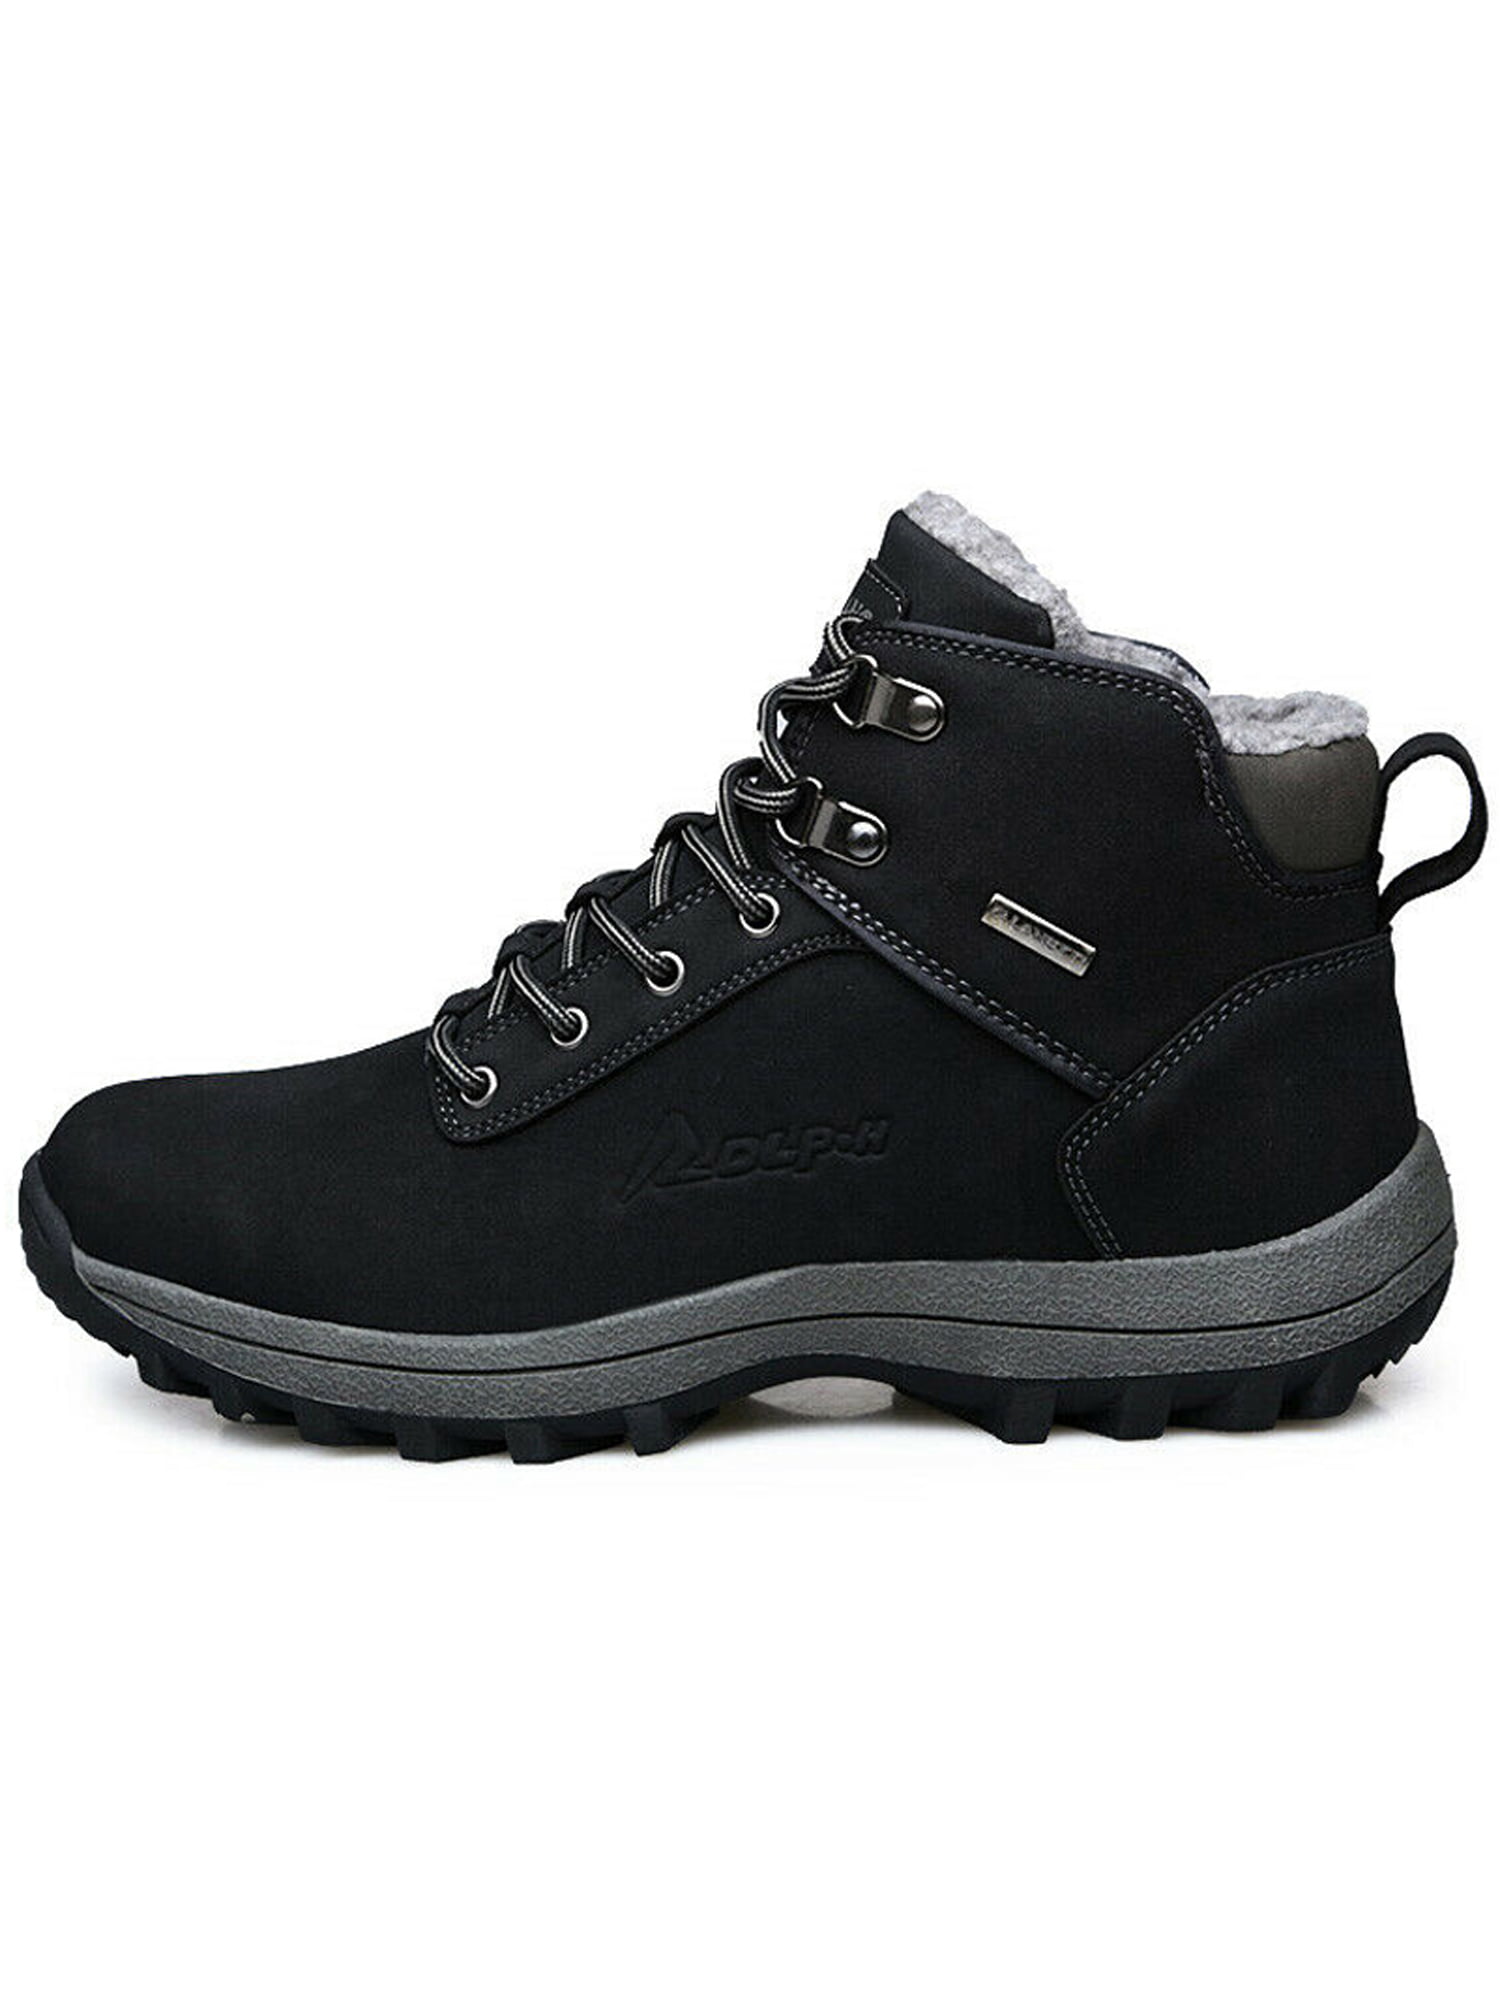 Men's Faux Fur Lined Ankle Boots Winter Warm Hiking Sneakers Thicken Snow Shoes